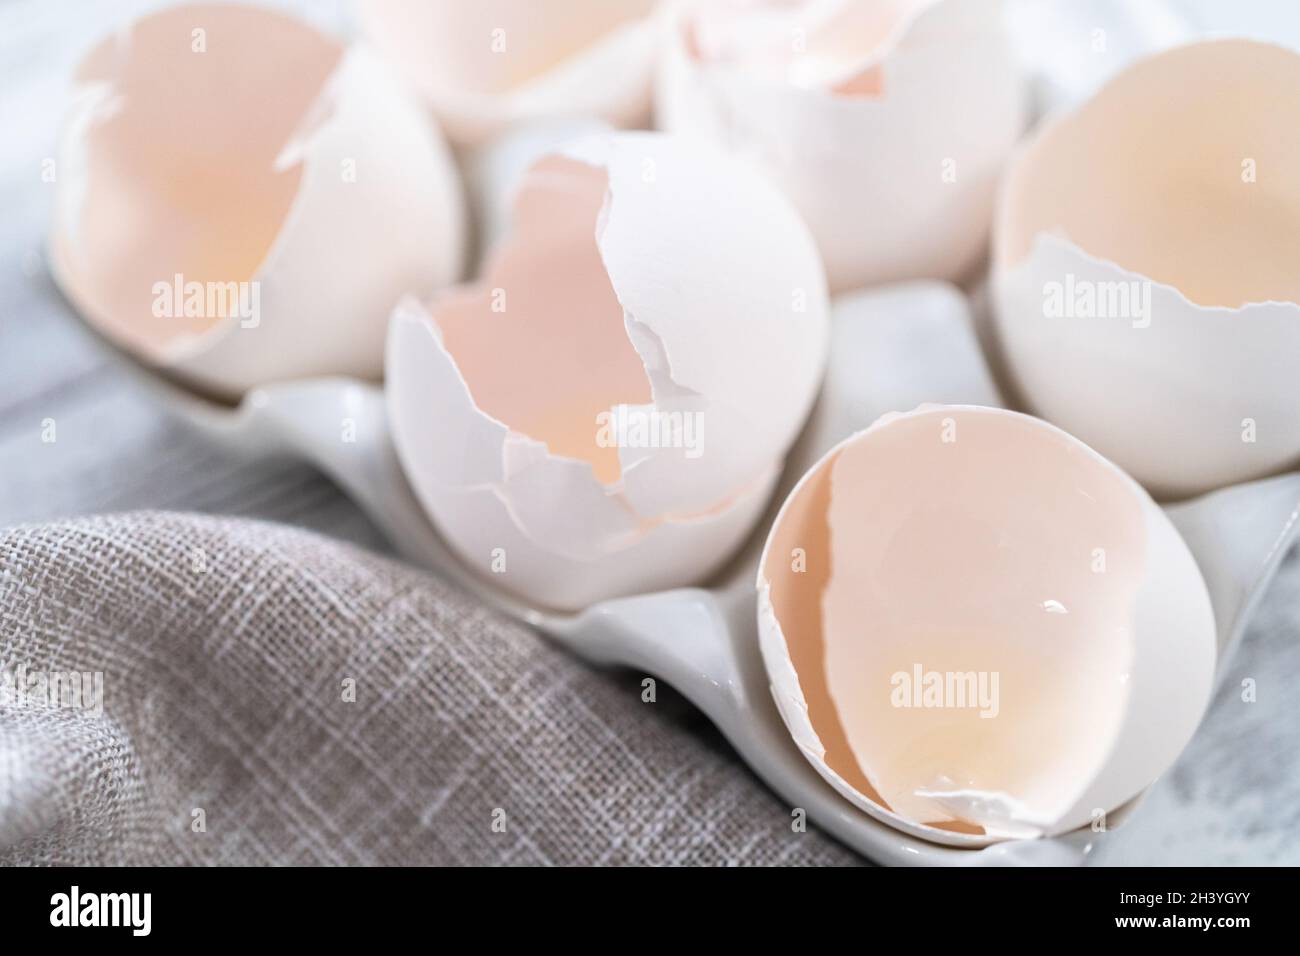 Empty egg shells from organic white eggs in ceramic egg crates. Stock Photo